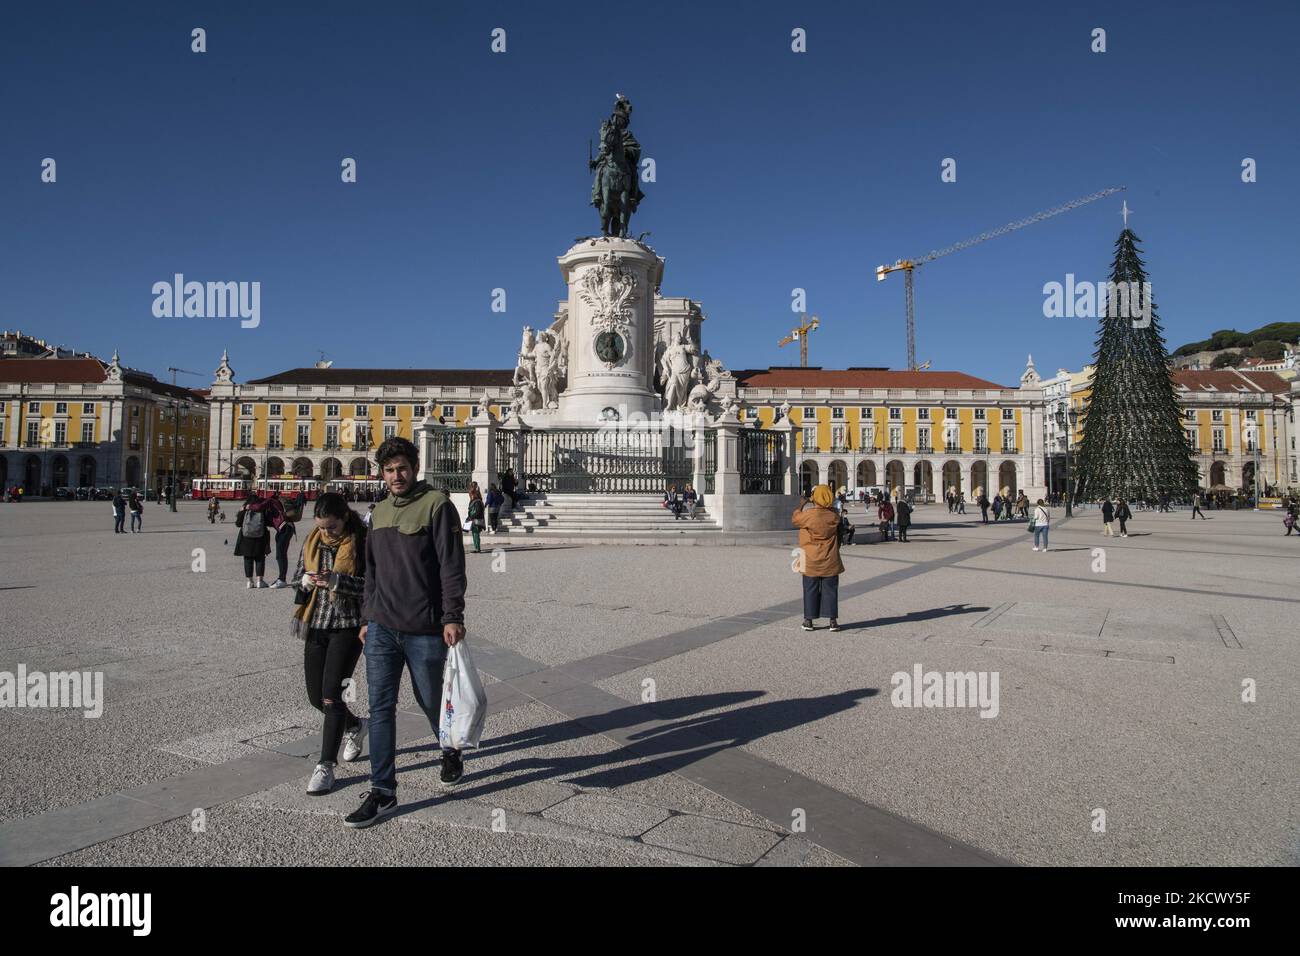 People take walks near PraÃ§a de Comercio, Lisbon. November 26, 2021. Prime Minister AntÃ³nio Costa said that the omicron variant of COVID-19 has not yet been detected in Portugal, but that if it is, 'appropriate measures' will be taken. (Photo by Jorge Mantilla/NurPhoto) Stock Photo